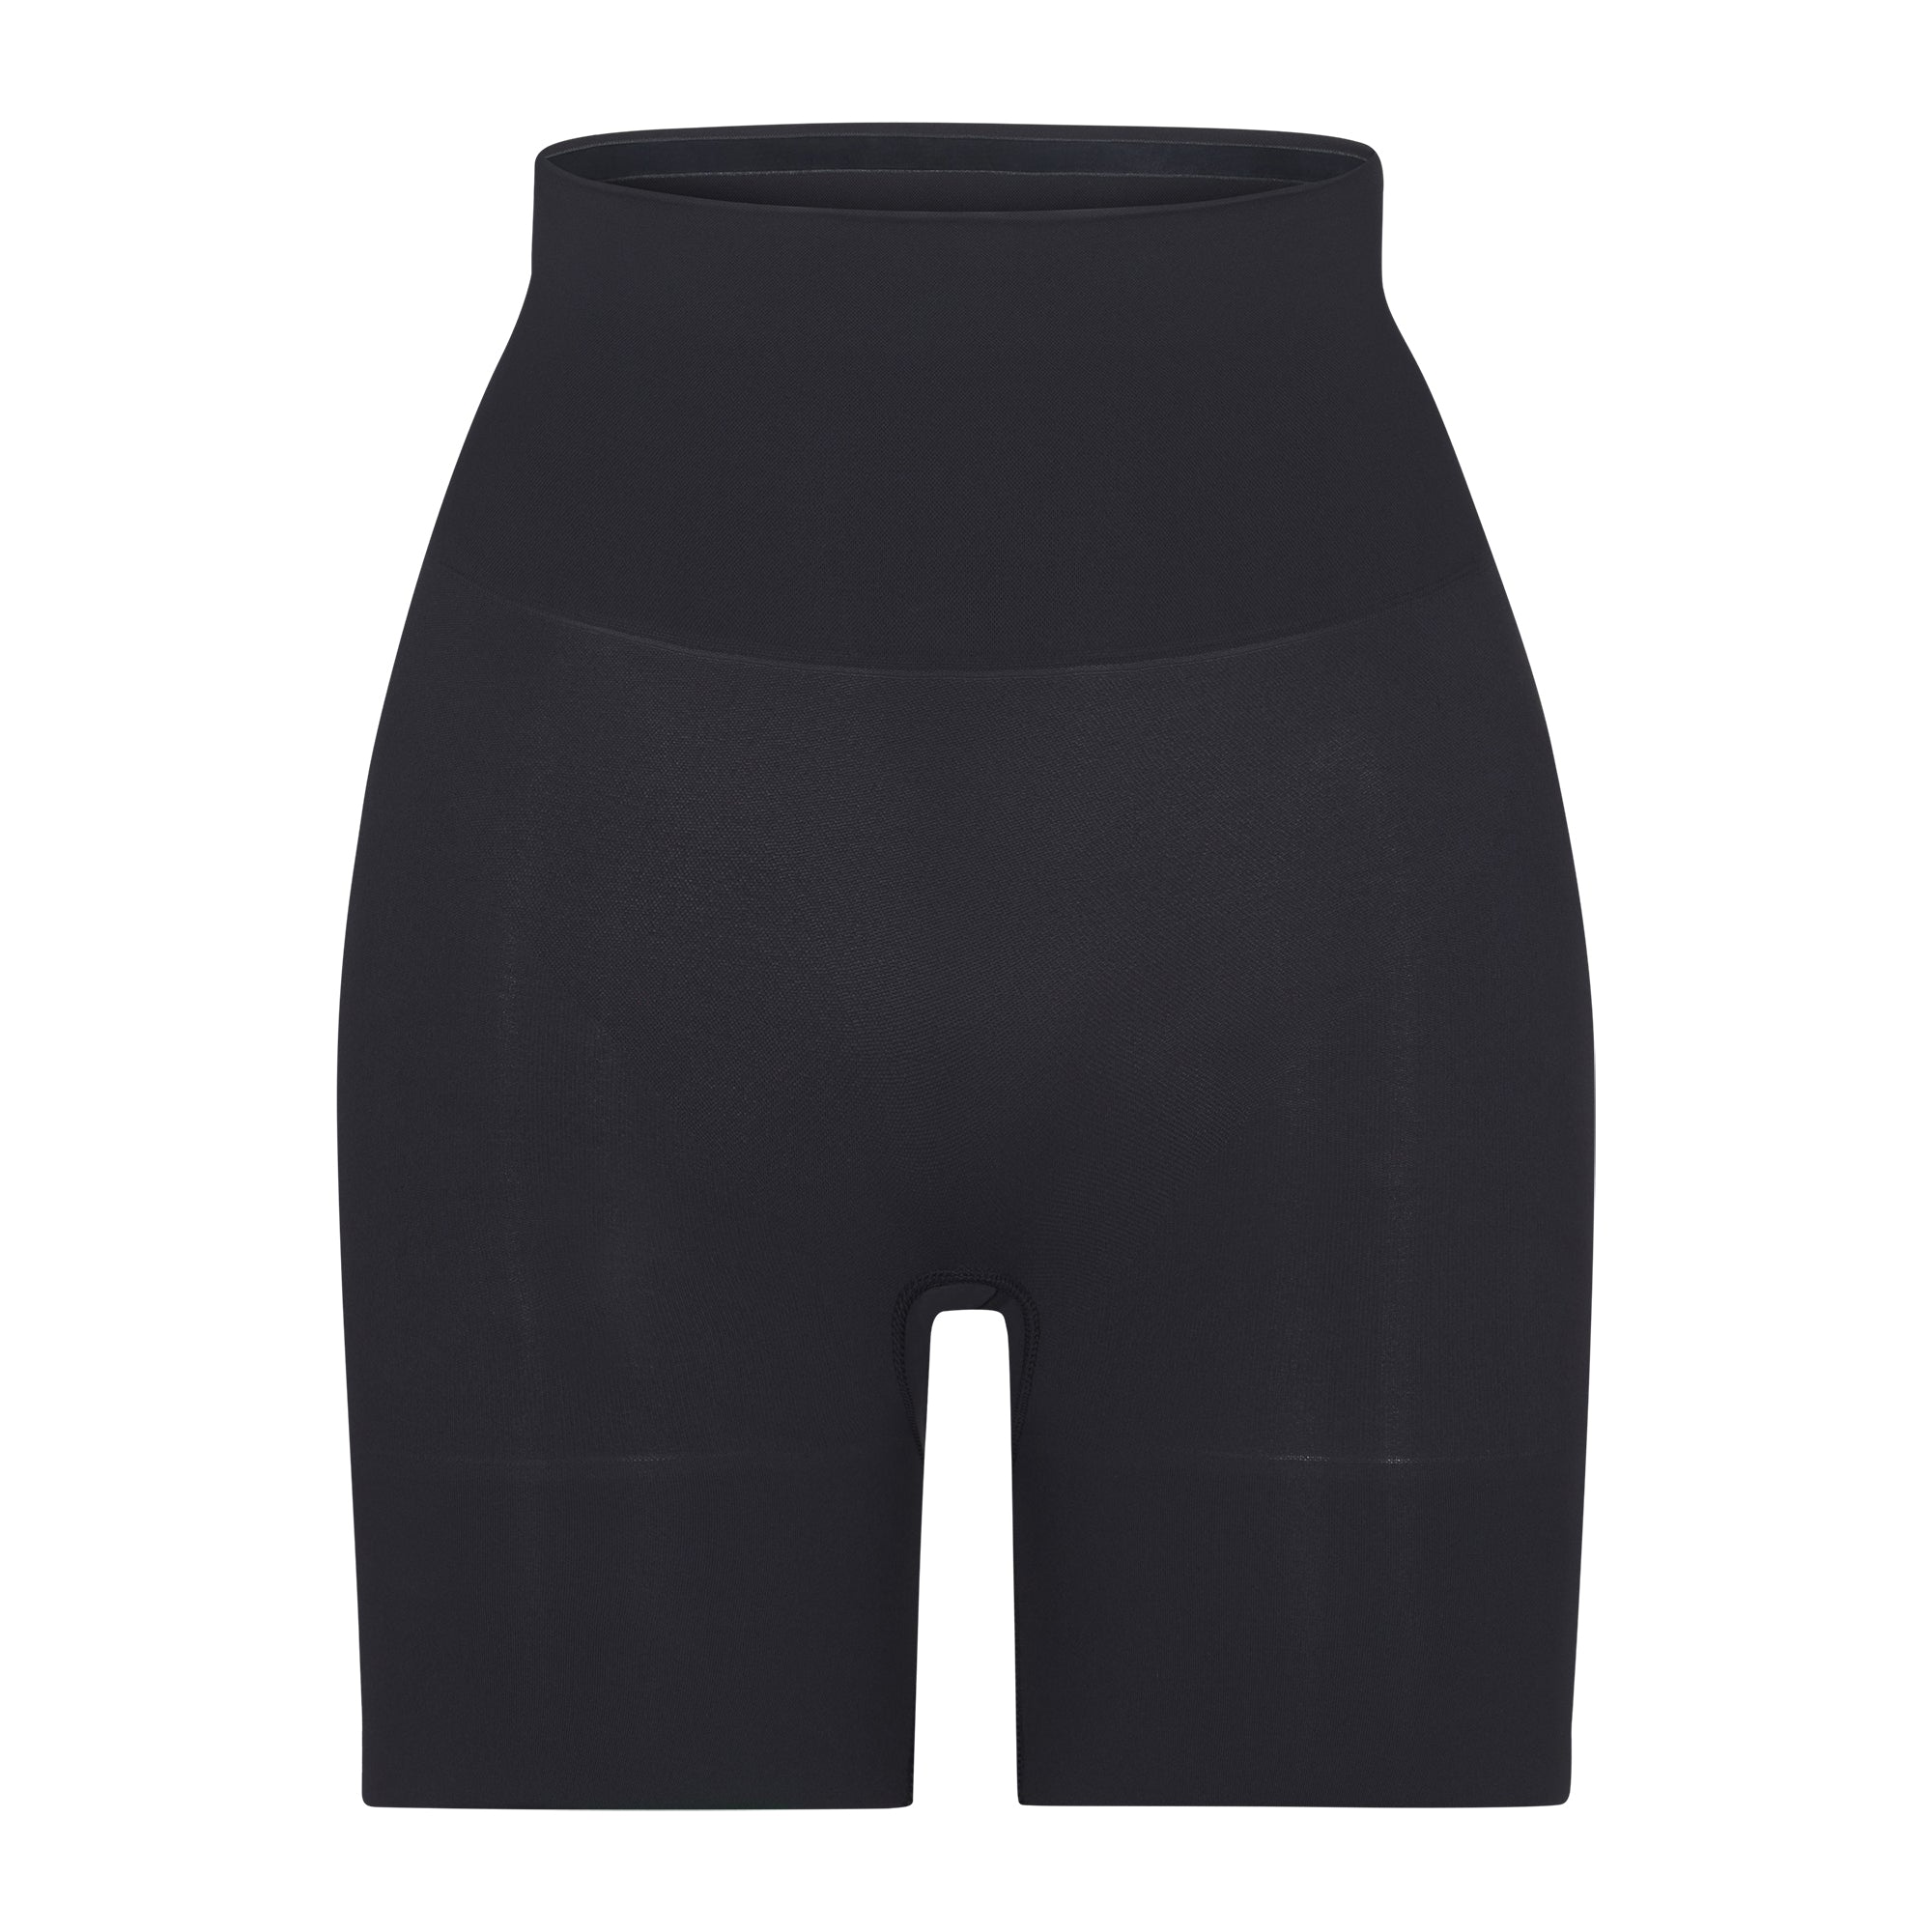 Your butt will never look better. Our Butt-Enhancing Shapewear features  multiple compression levels and large butt pockets that snatch an